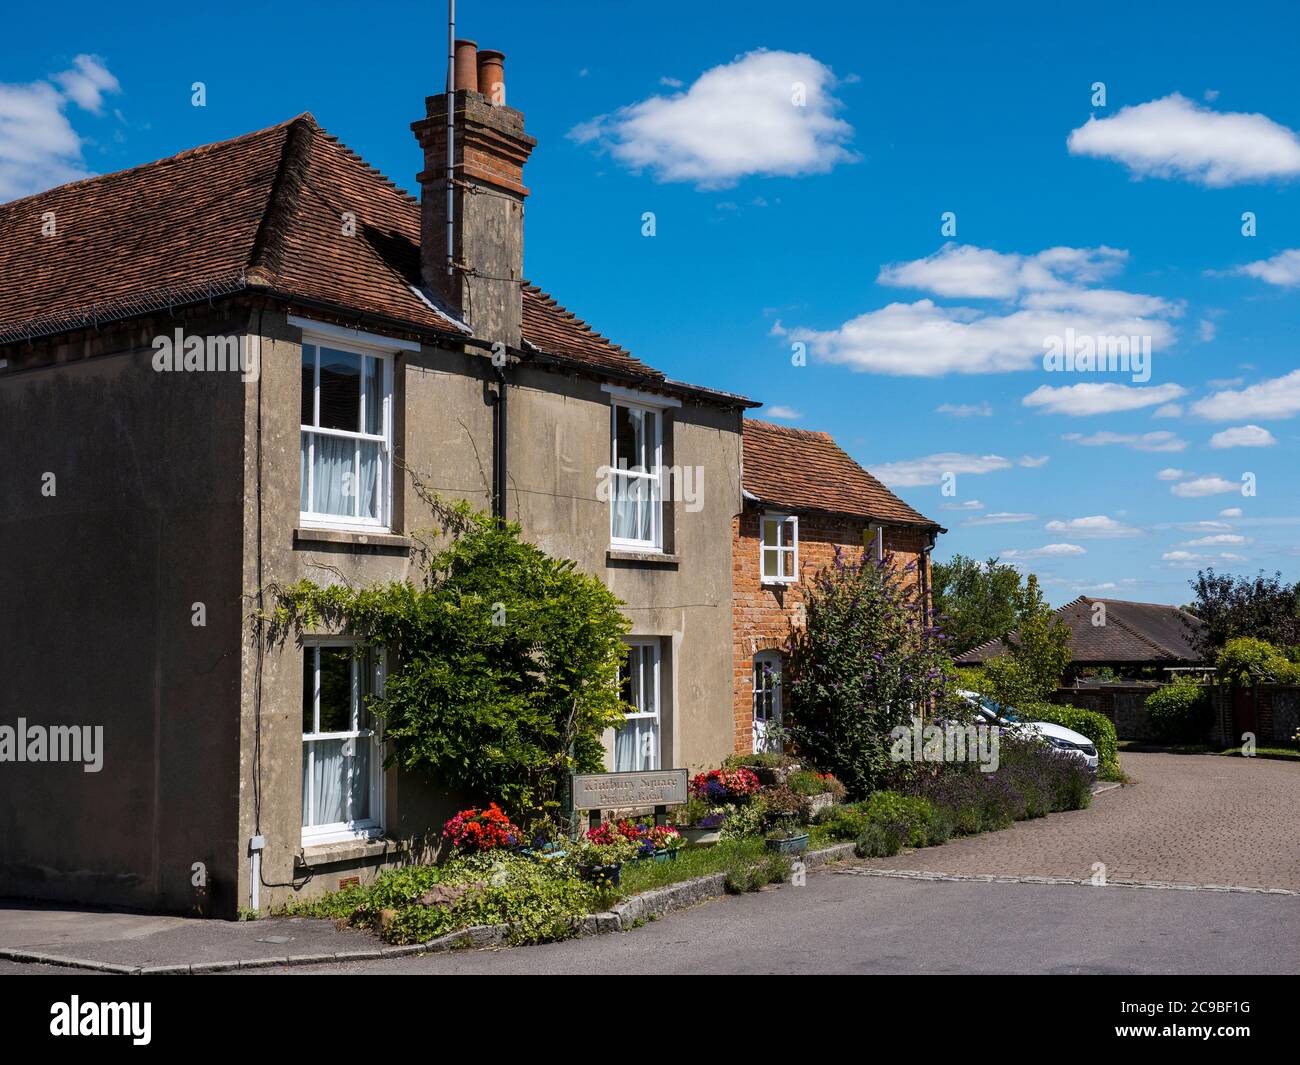 Village House with Flowers, Kintbury, Berkshire, Angleterre, Royaume-Uni, GB. Banque D'Images